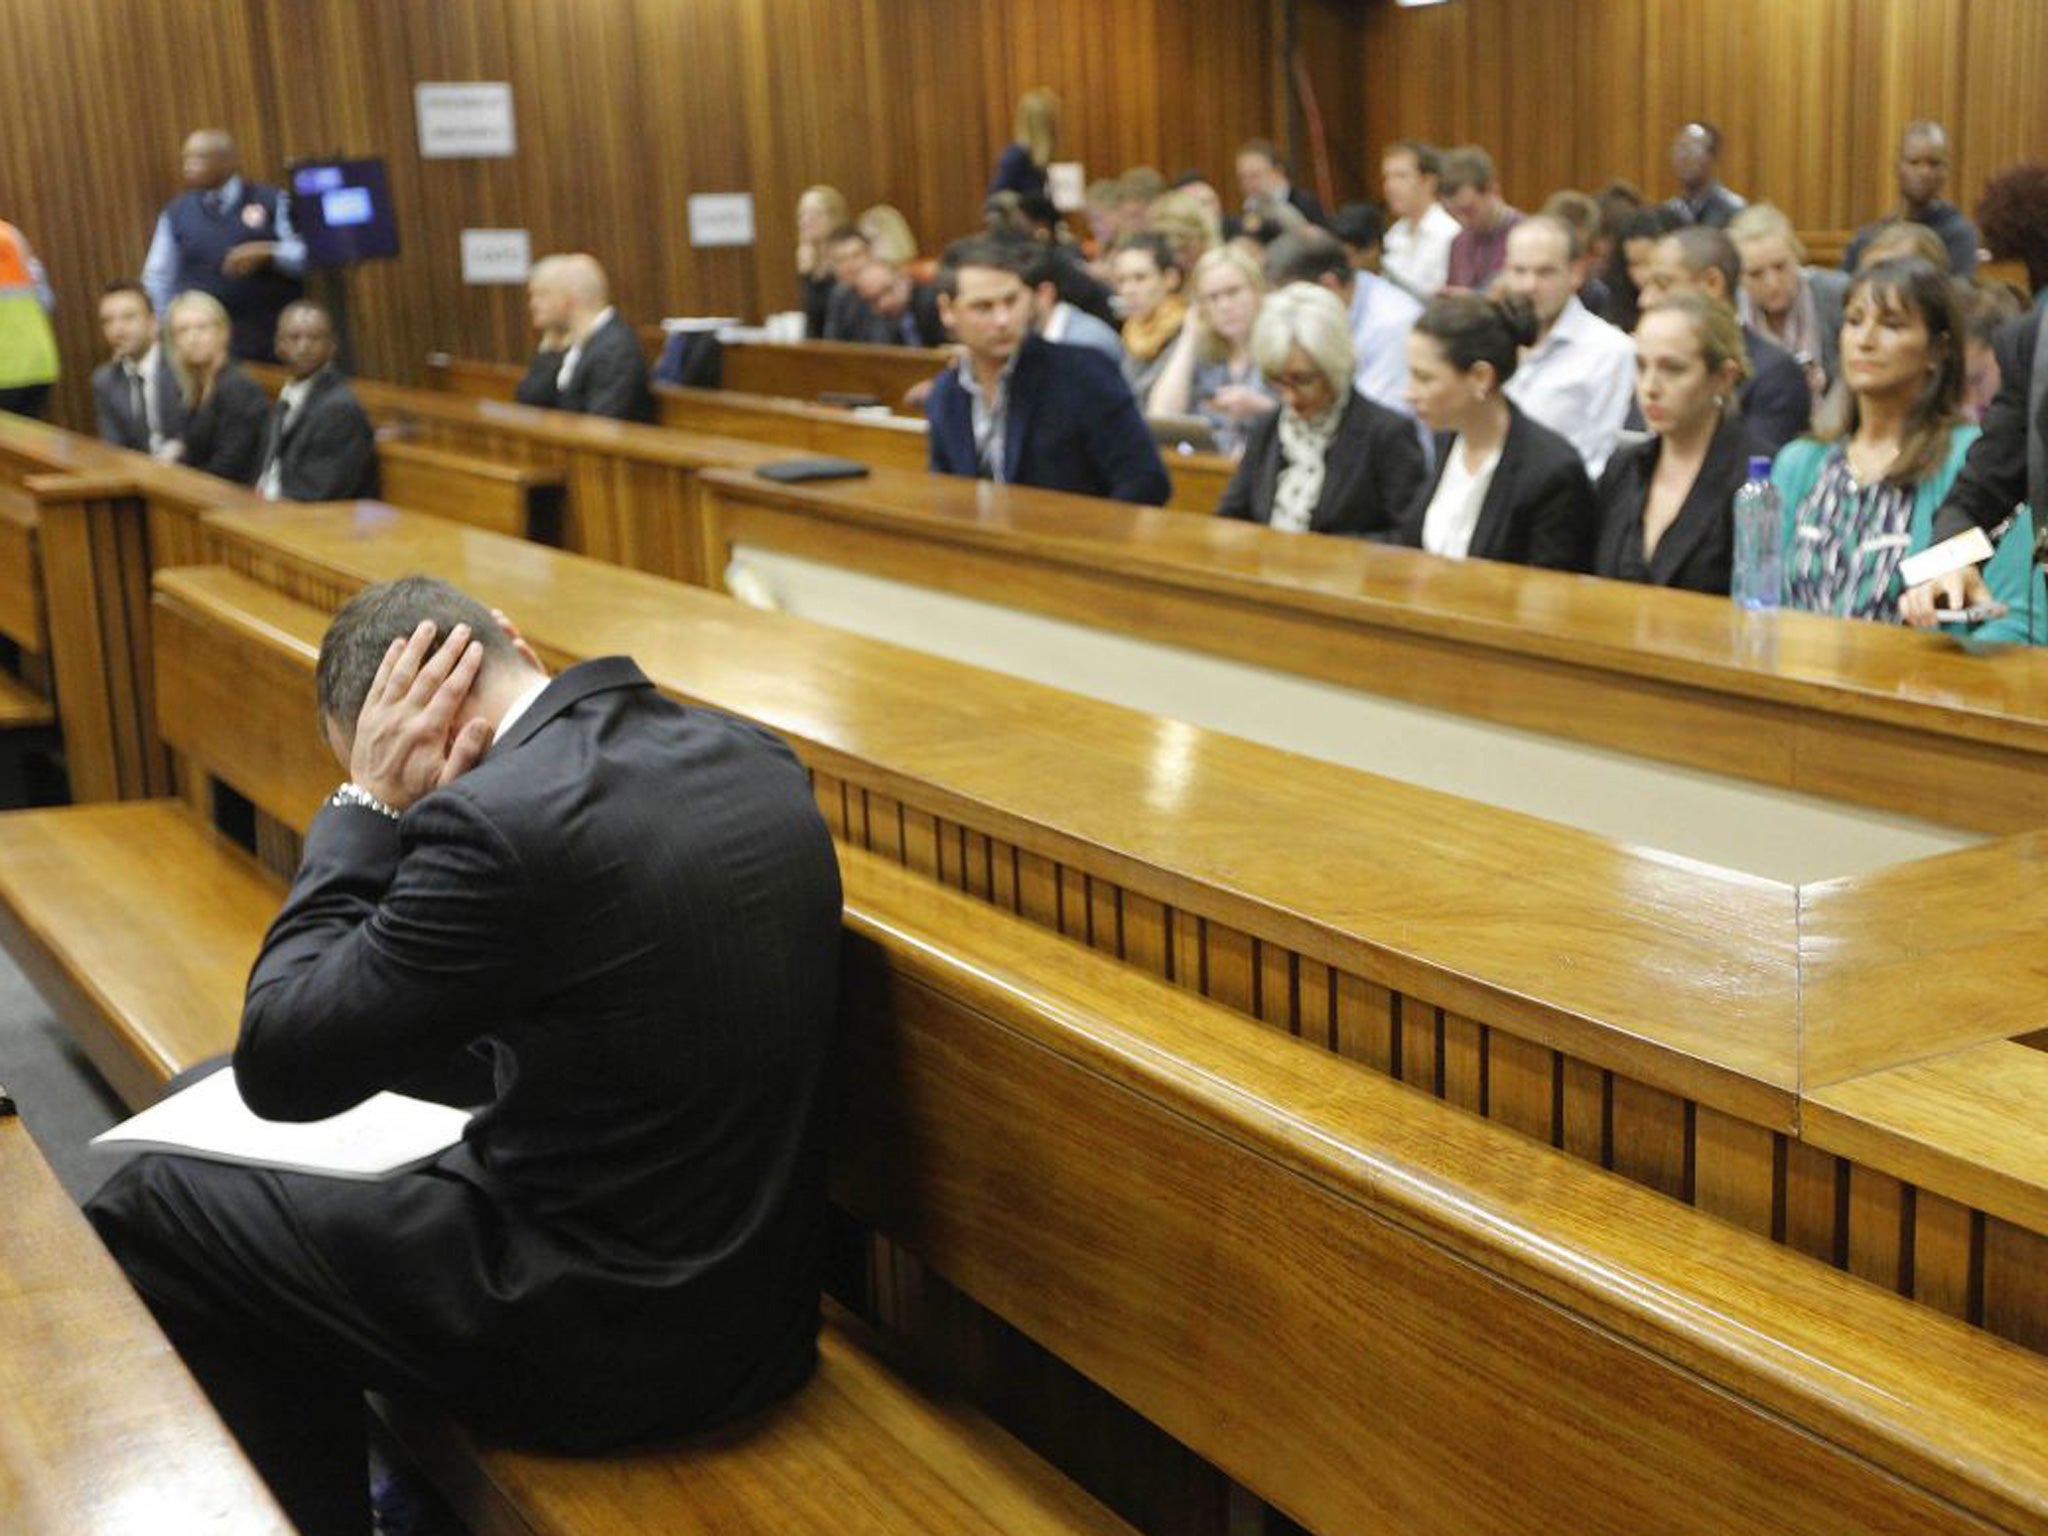 Oscar Pistorius blocks his ears inside the high court on the second day of his trial in Pretoria, South Africa